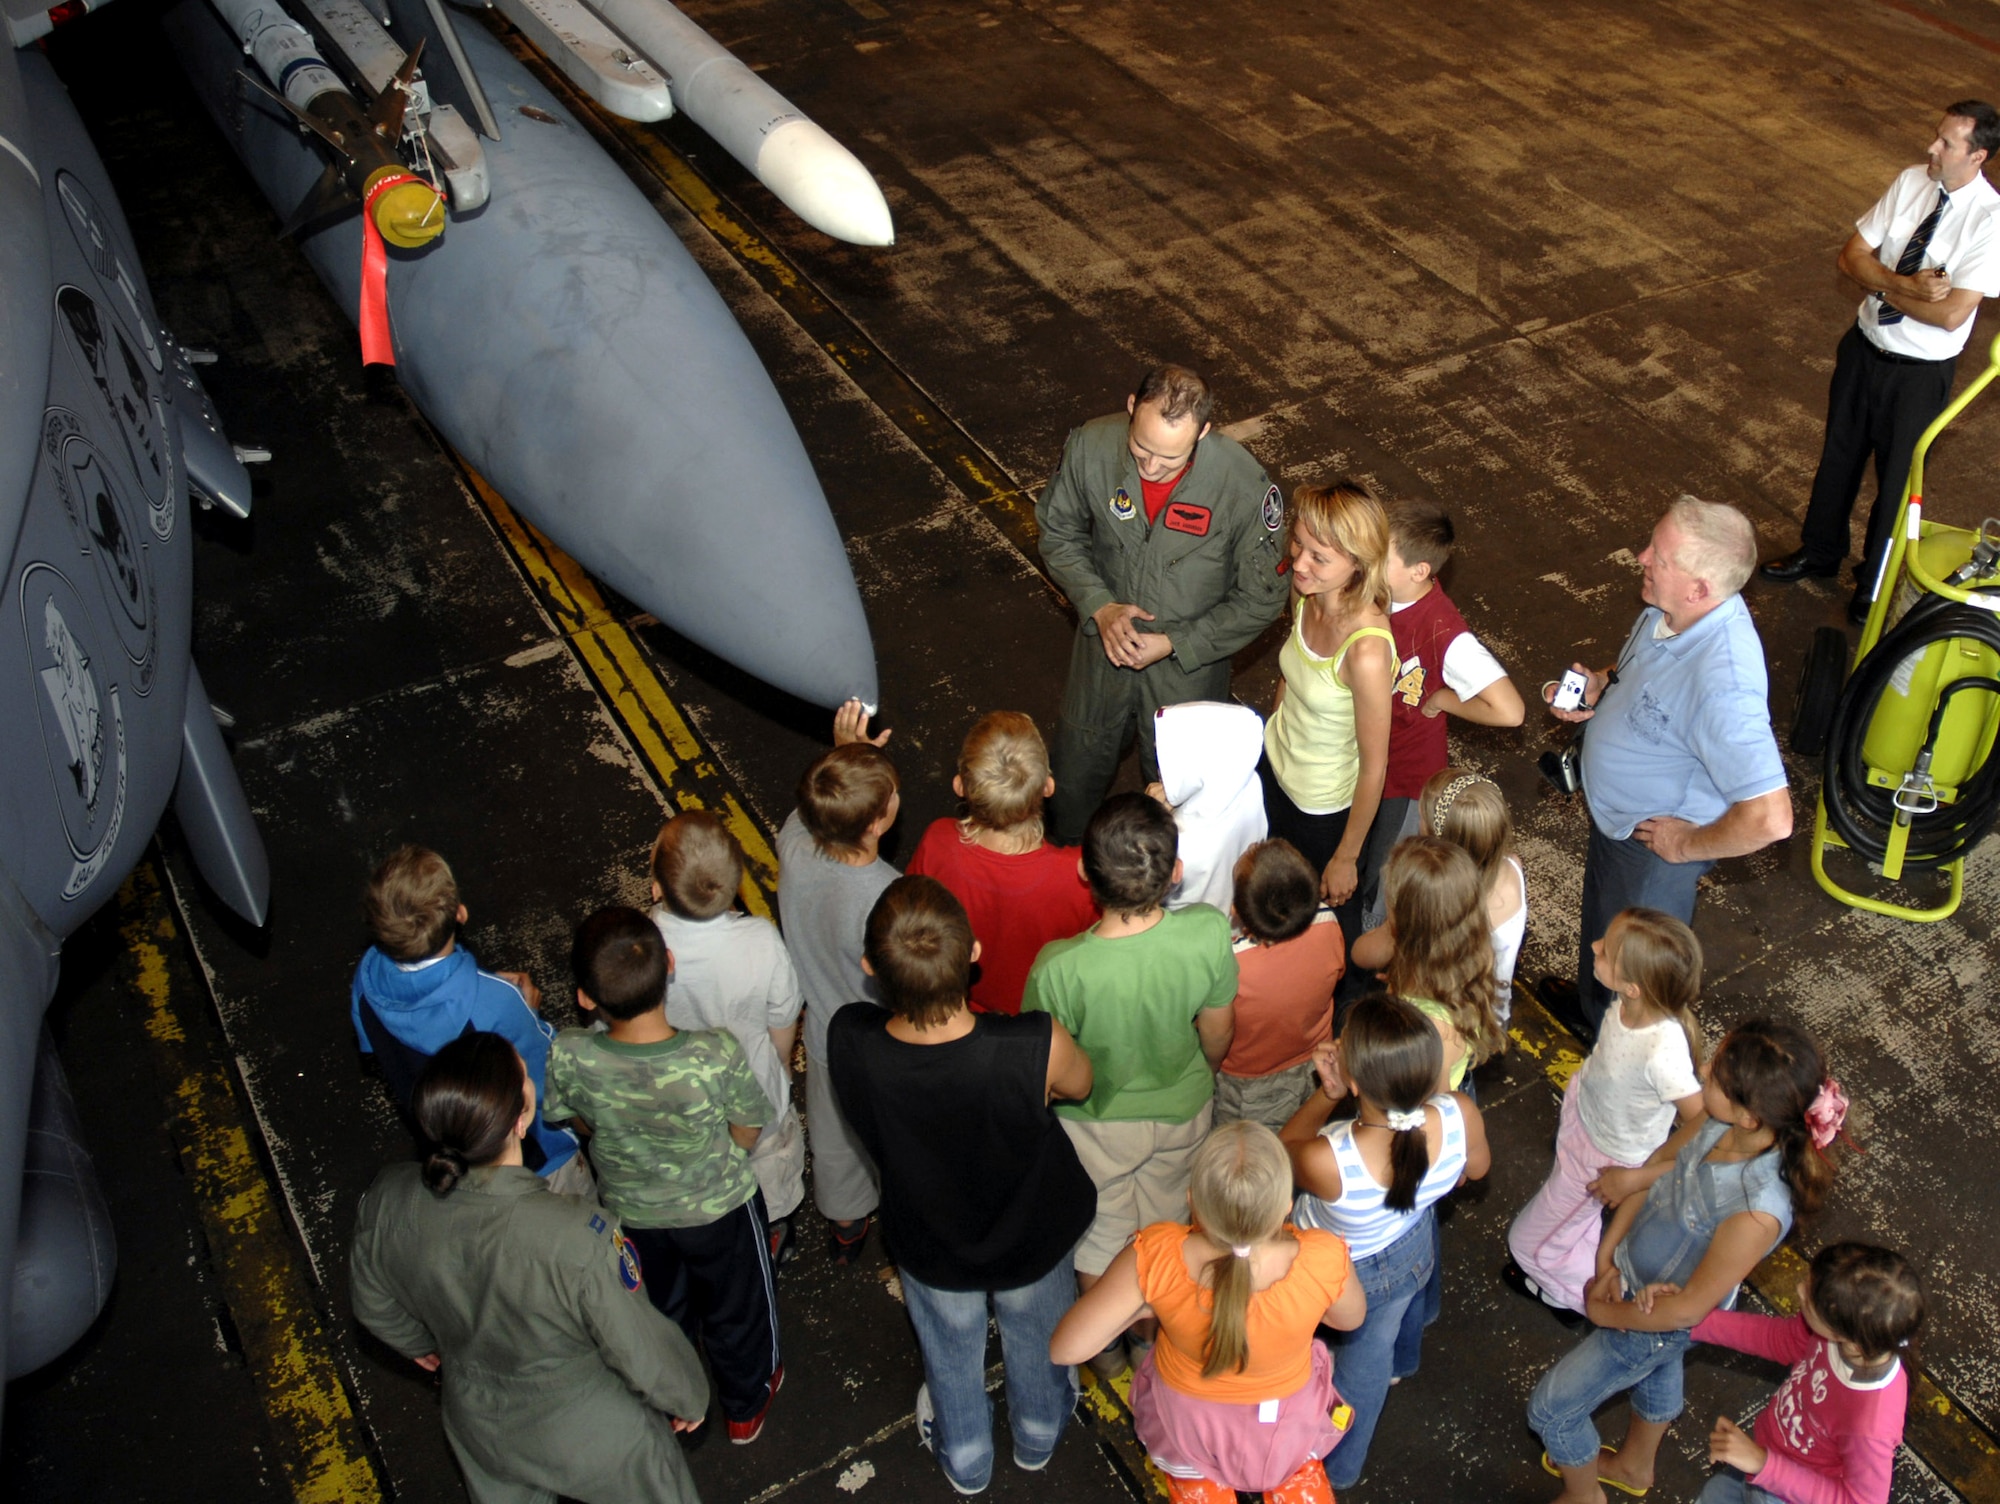 More than 20 Belarusian children huddle around 1st Lt. Jacob Anderson, a 494th Fighter Squadron pilot, as he talks about the F-15E Strike Eagle at Royal Air Force Lakenheath, England. The children got to tour the base as part of their visit to the United Kingdom through a charity called the Chernobyl Children Lifeline. The charity was founded for the children of Belarus, which is a developing country that suffered most from the fall-out caused by the Chernobyl nuclear accident in 1986. (U.S. Air Force photo/Airman 1st Class Erika Brooke)